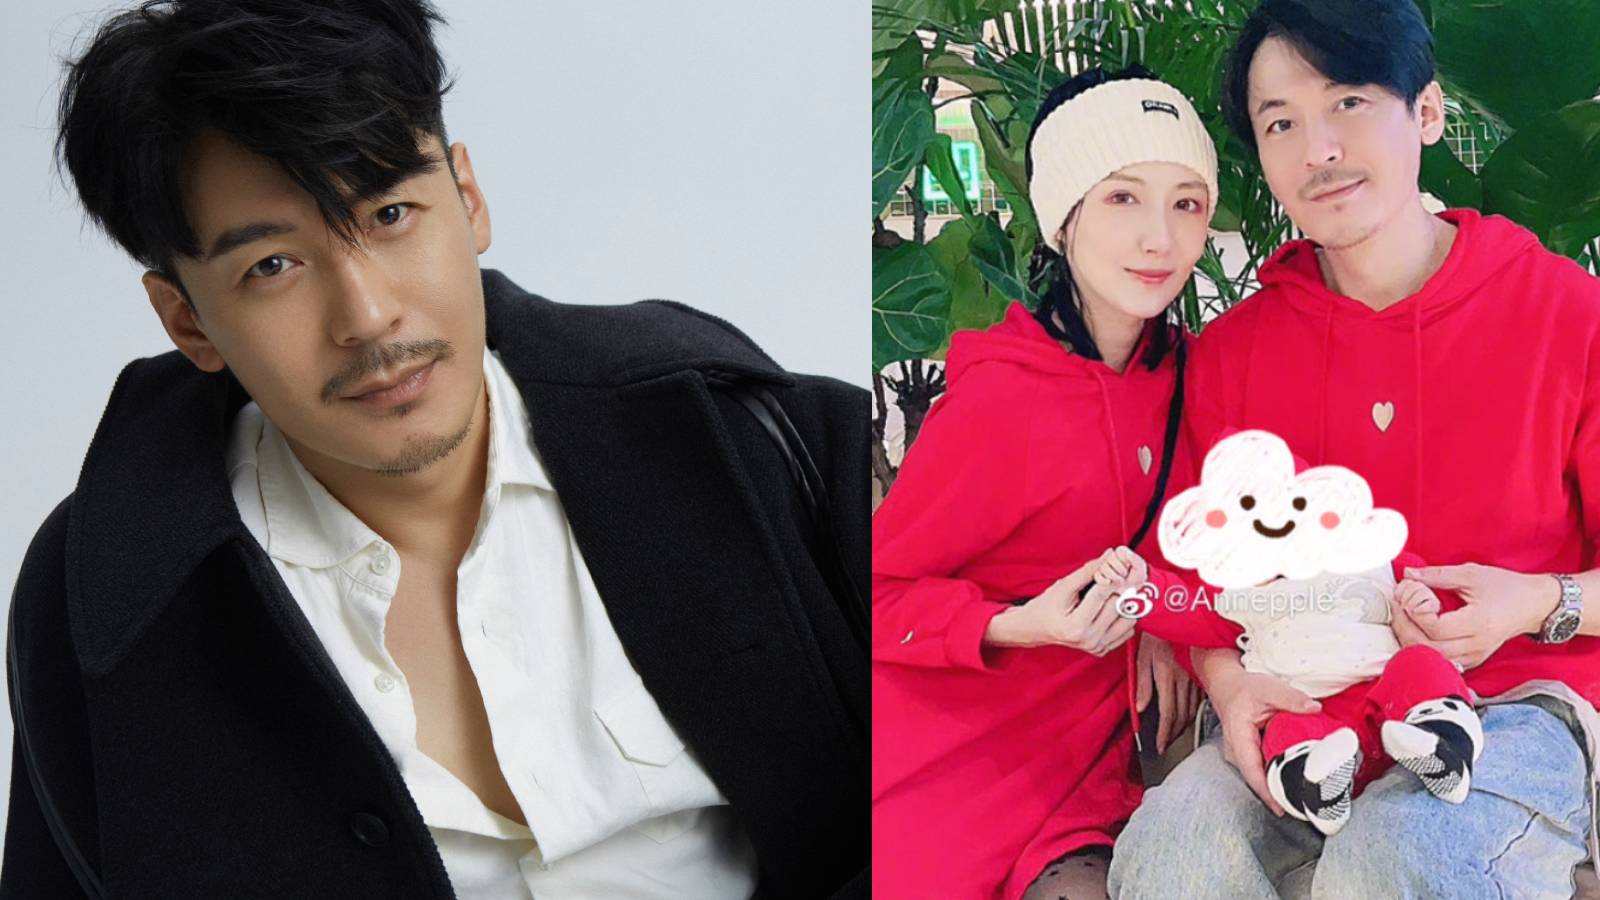 Chinese Actor Wang Dong'S Wife Just Called Him Out For Going Mia On Her  Even Though Their Daughter Is Only 6 Months Old - 8Days